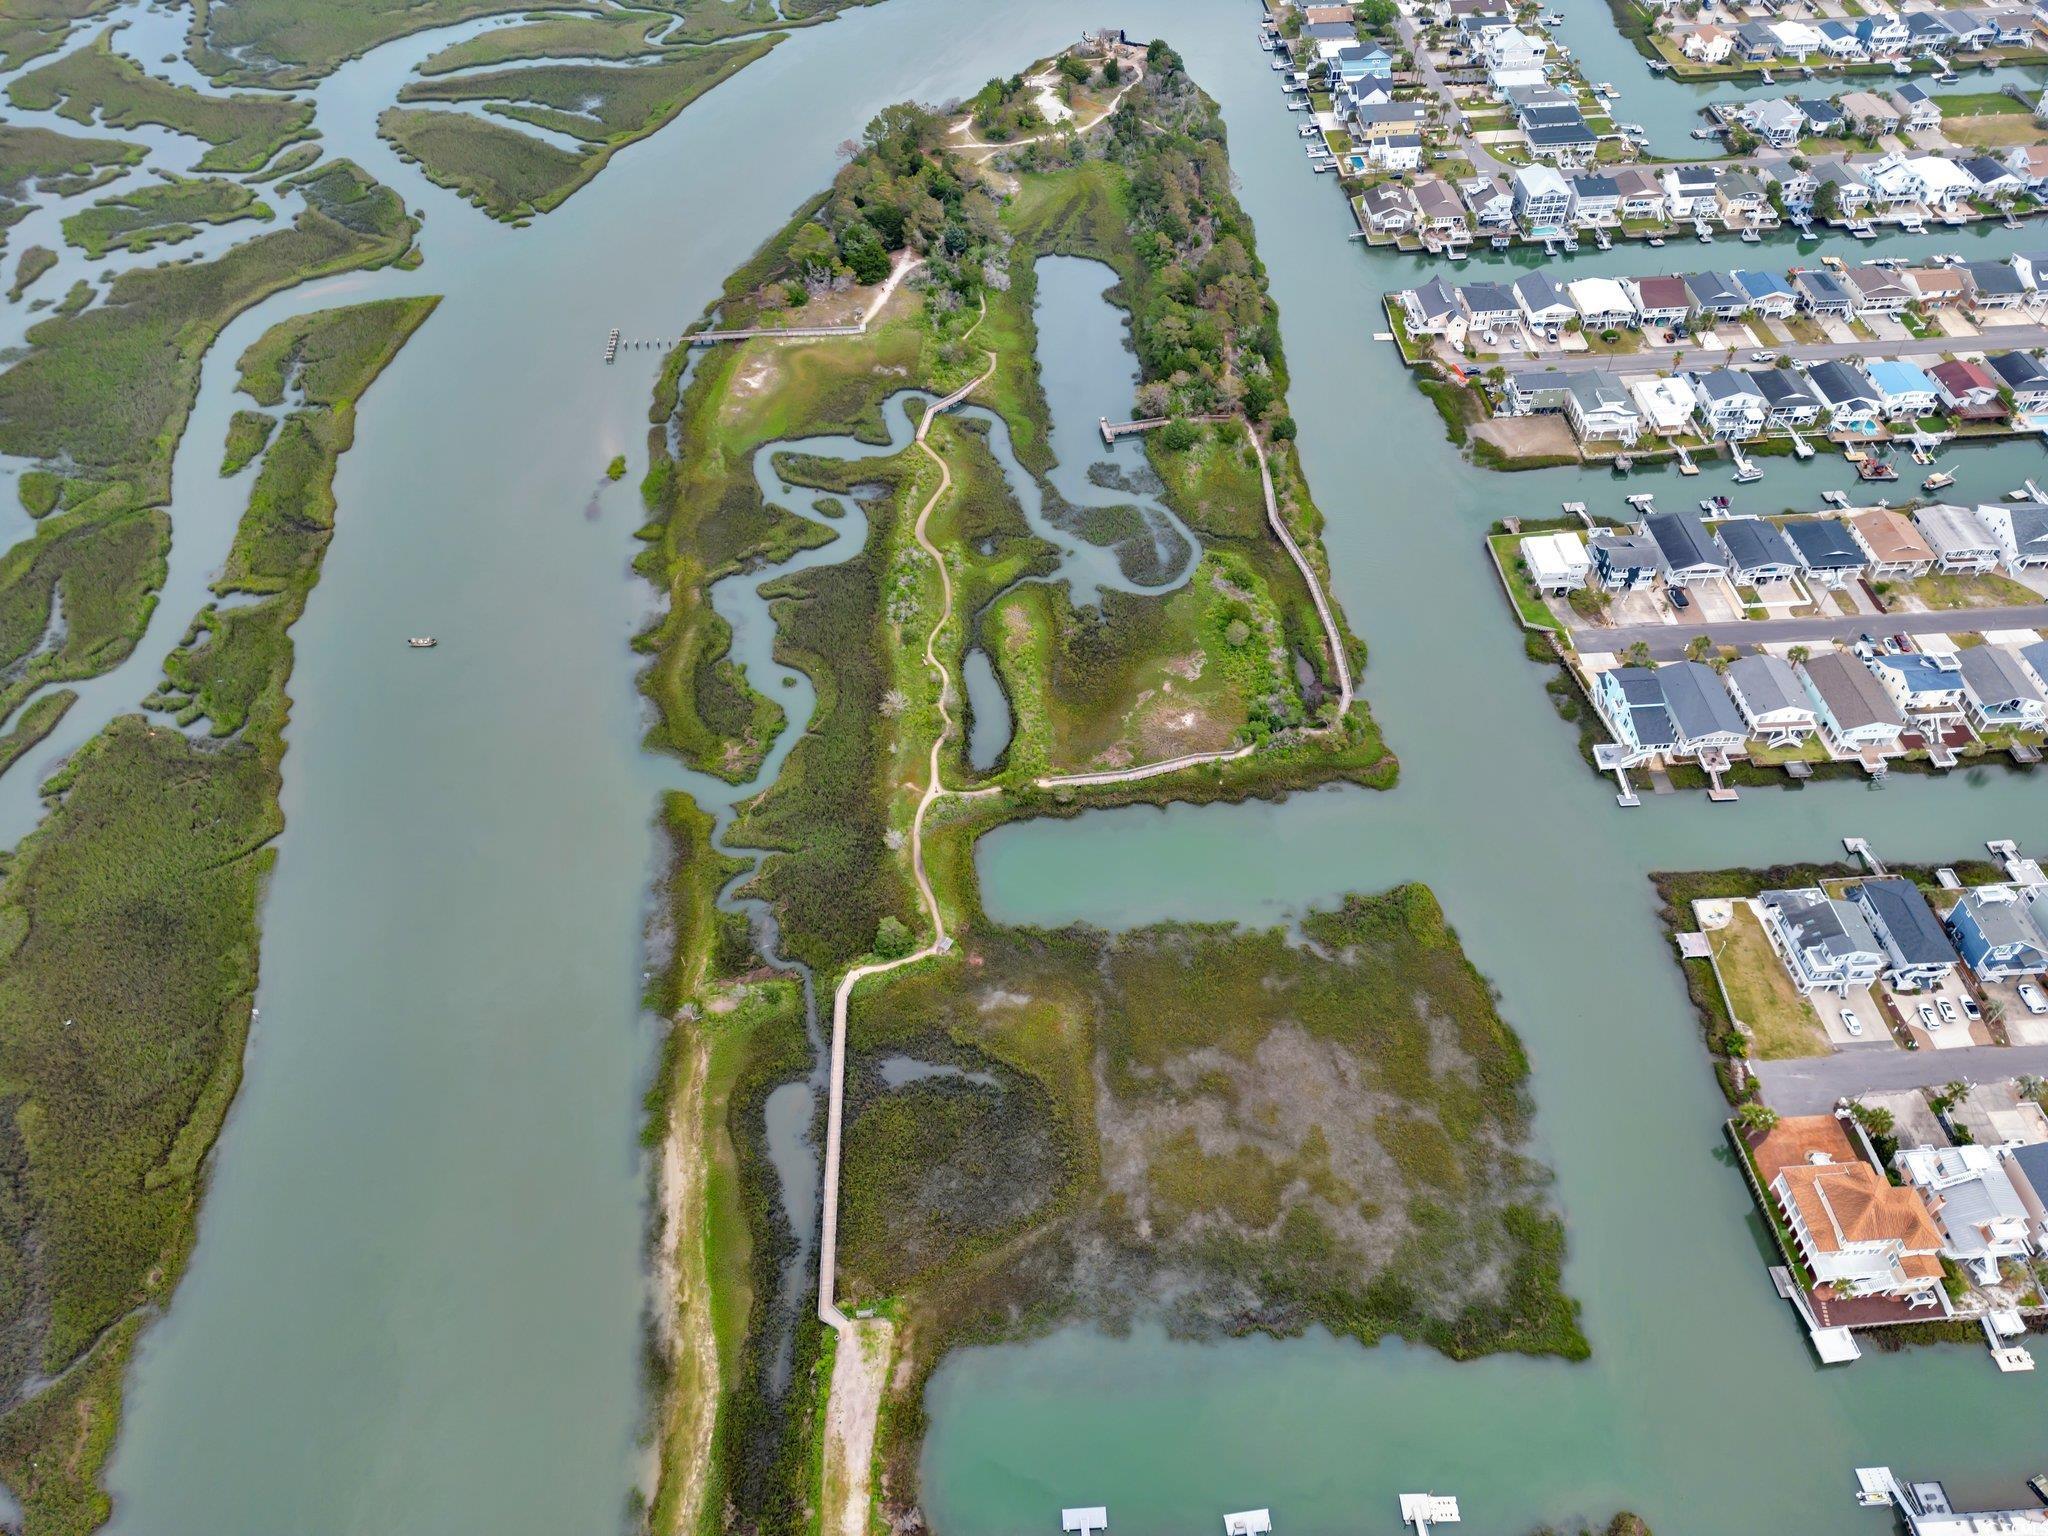 rare opportunity to own part of an environmental sanctuary located in the heart of cherry grove.  13 lots are being sold together.